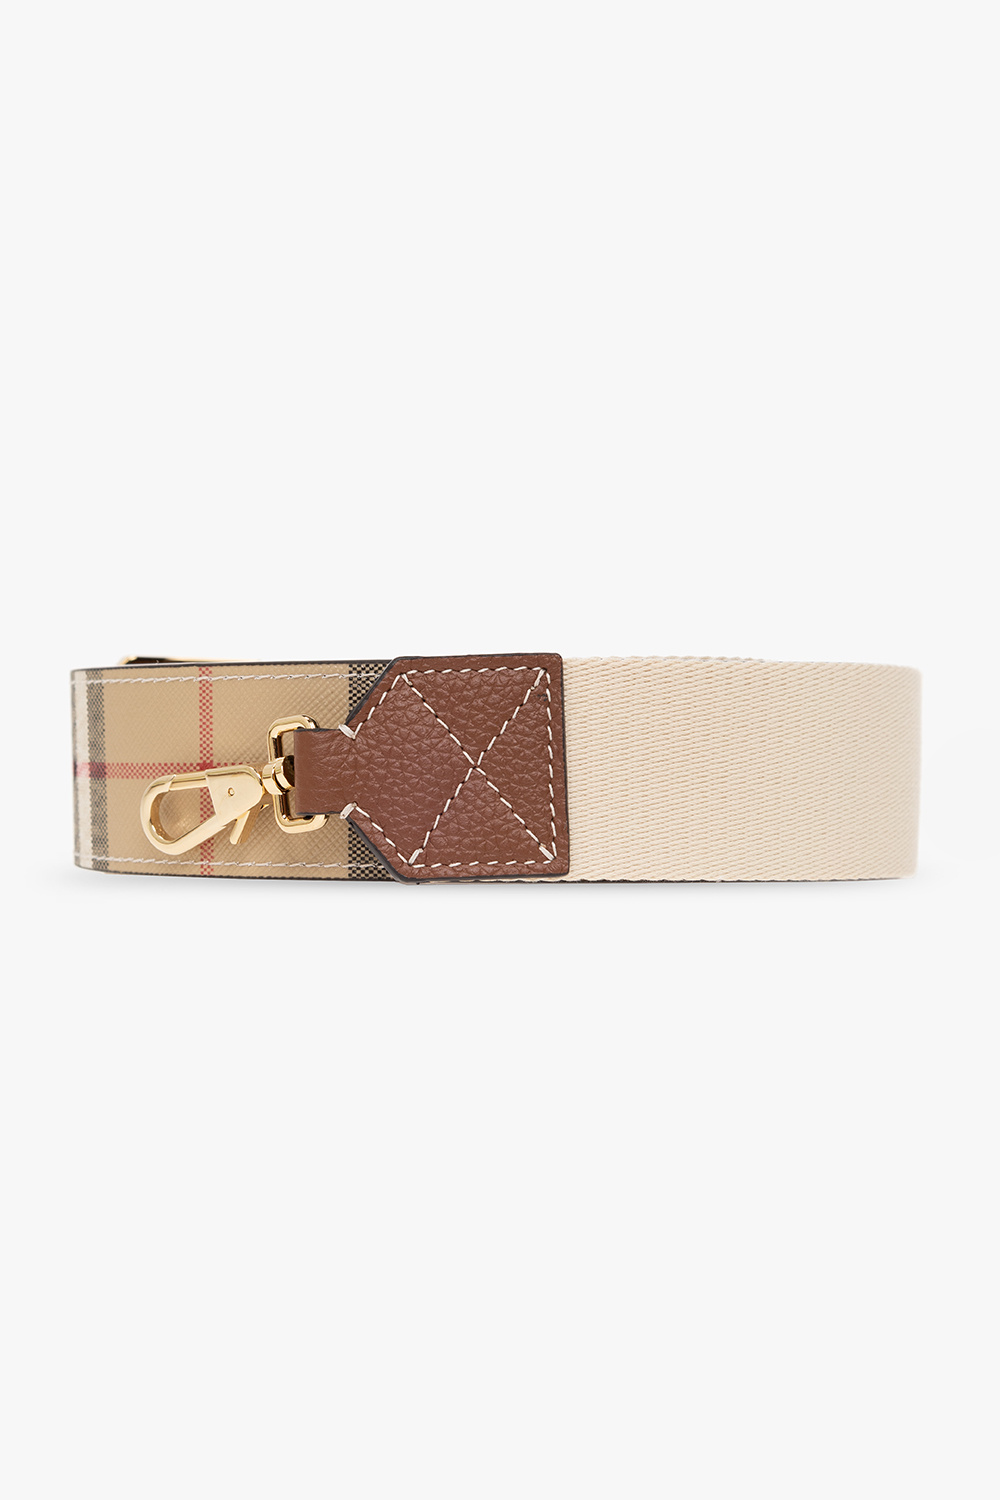 Burberry, Accessories, Burberry Belt Use